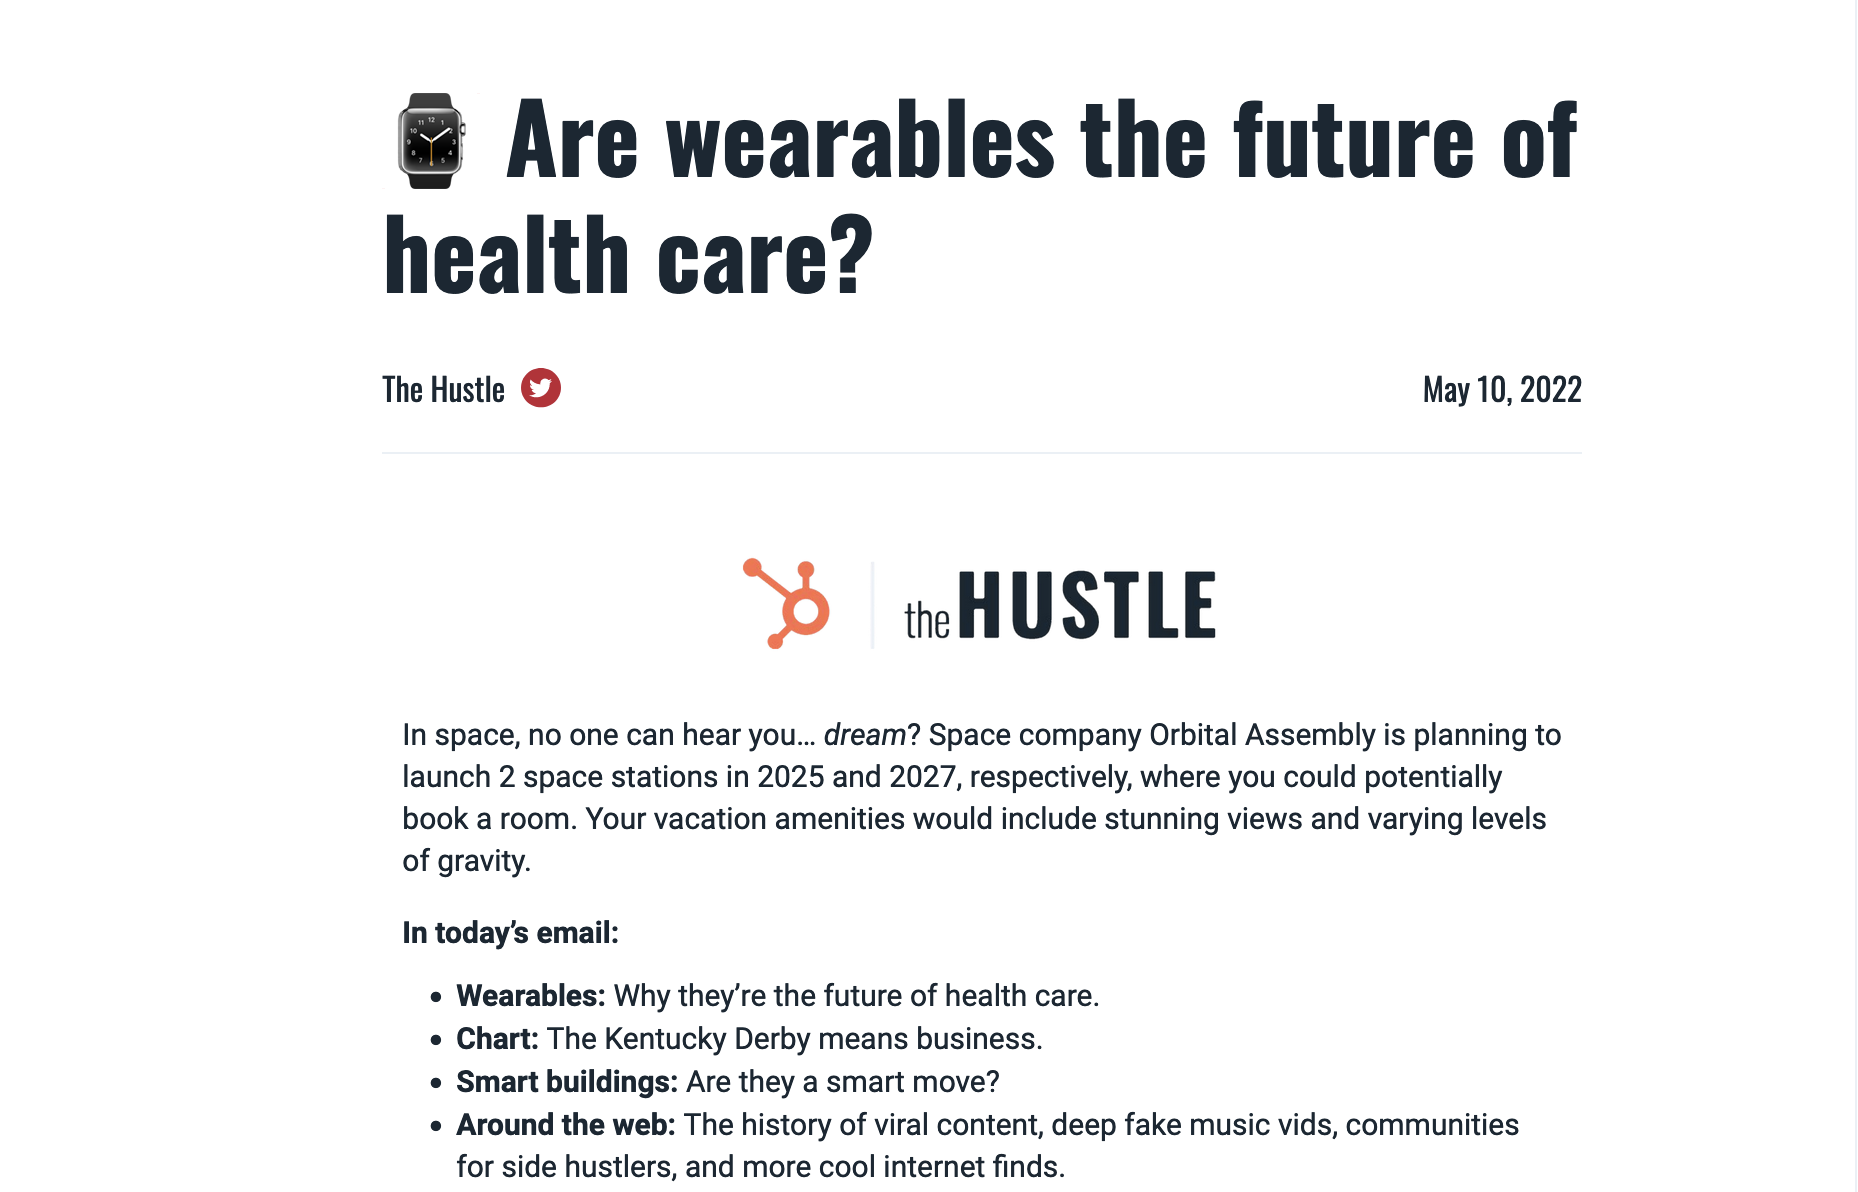 Are wearables the future of health care?